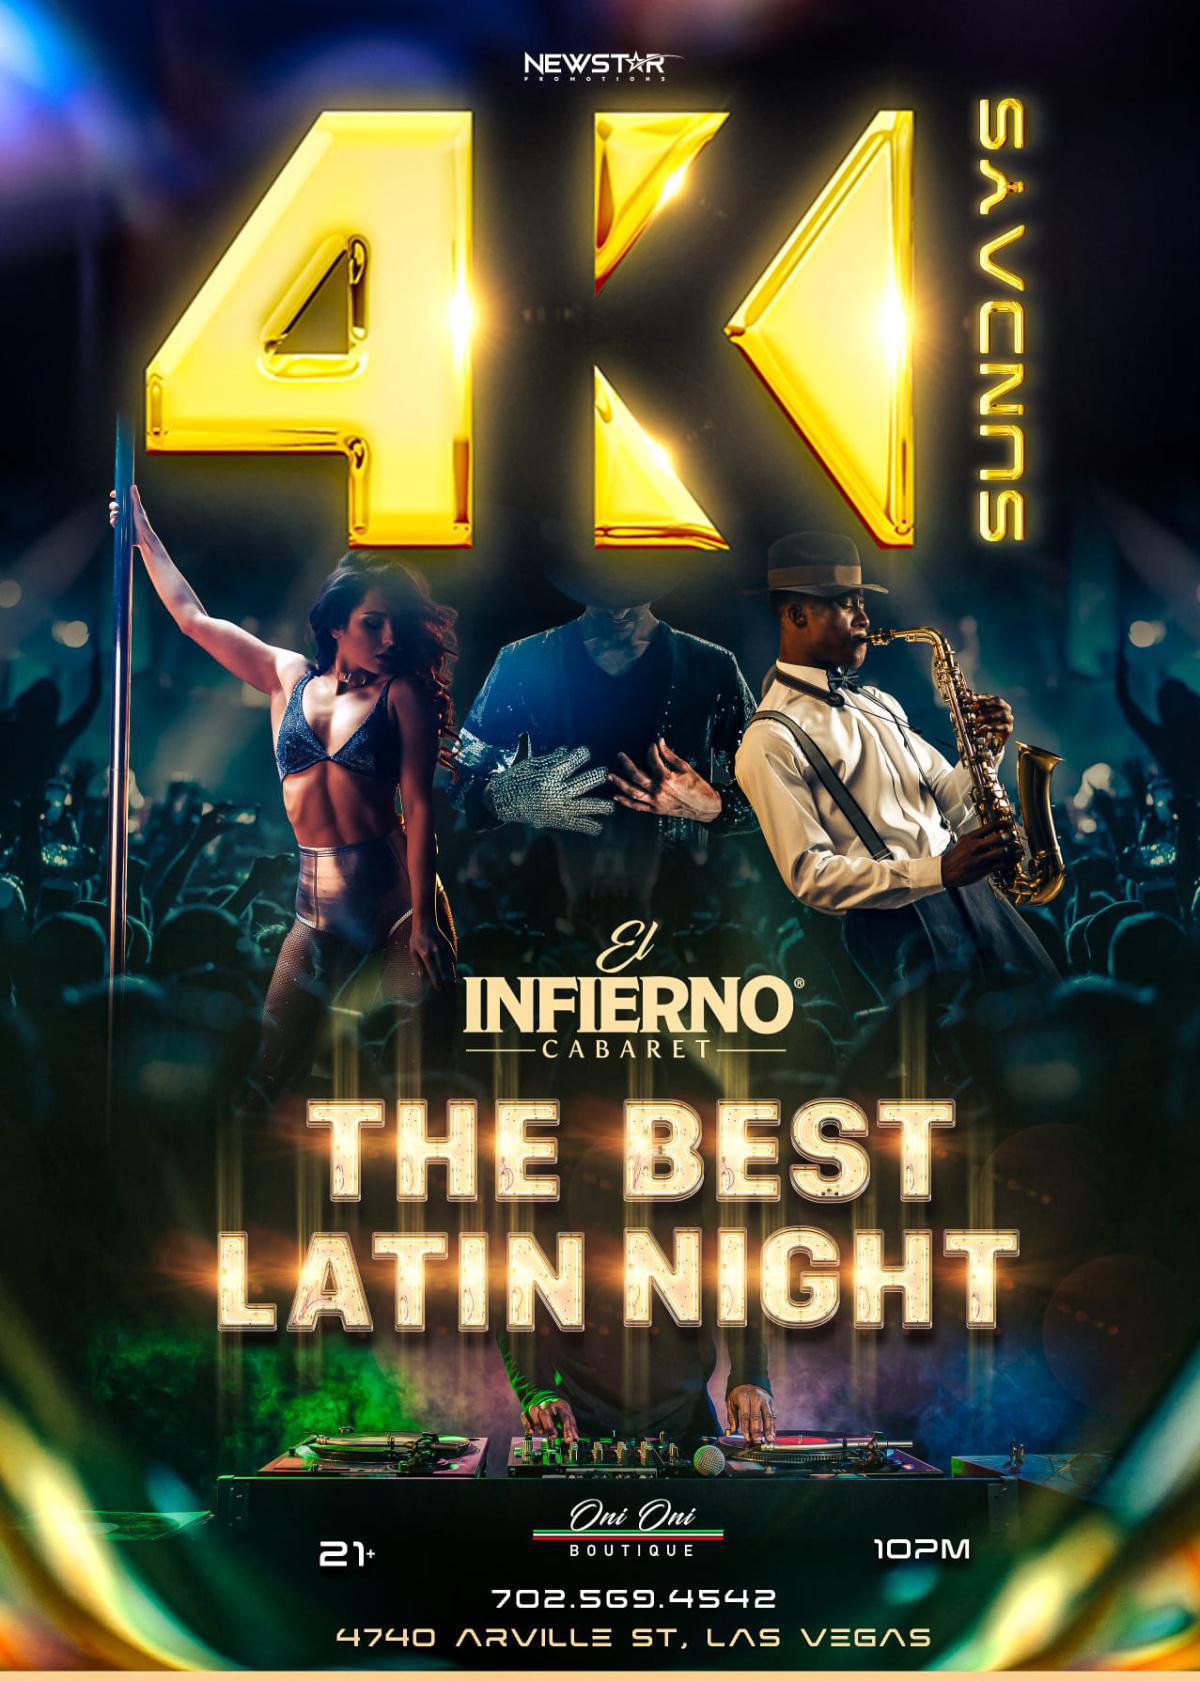 Tonight is the Best Latin Night in Vegas! 4K Sundays @ El Infierno Cabaret. Now paying $10 per person (male and female)! Every Sunday 10pm-Close.